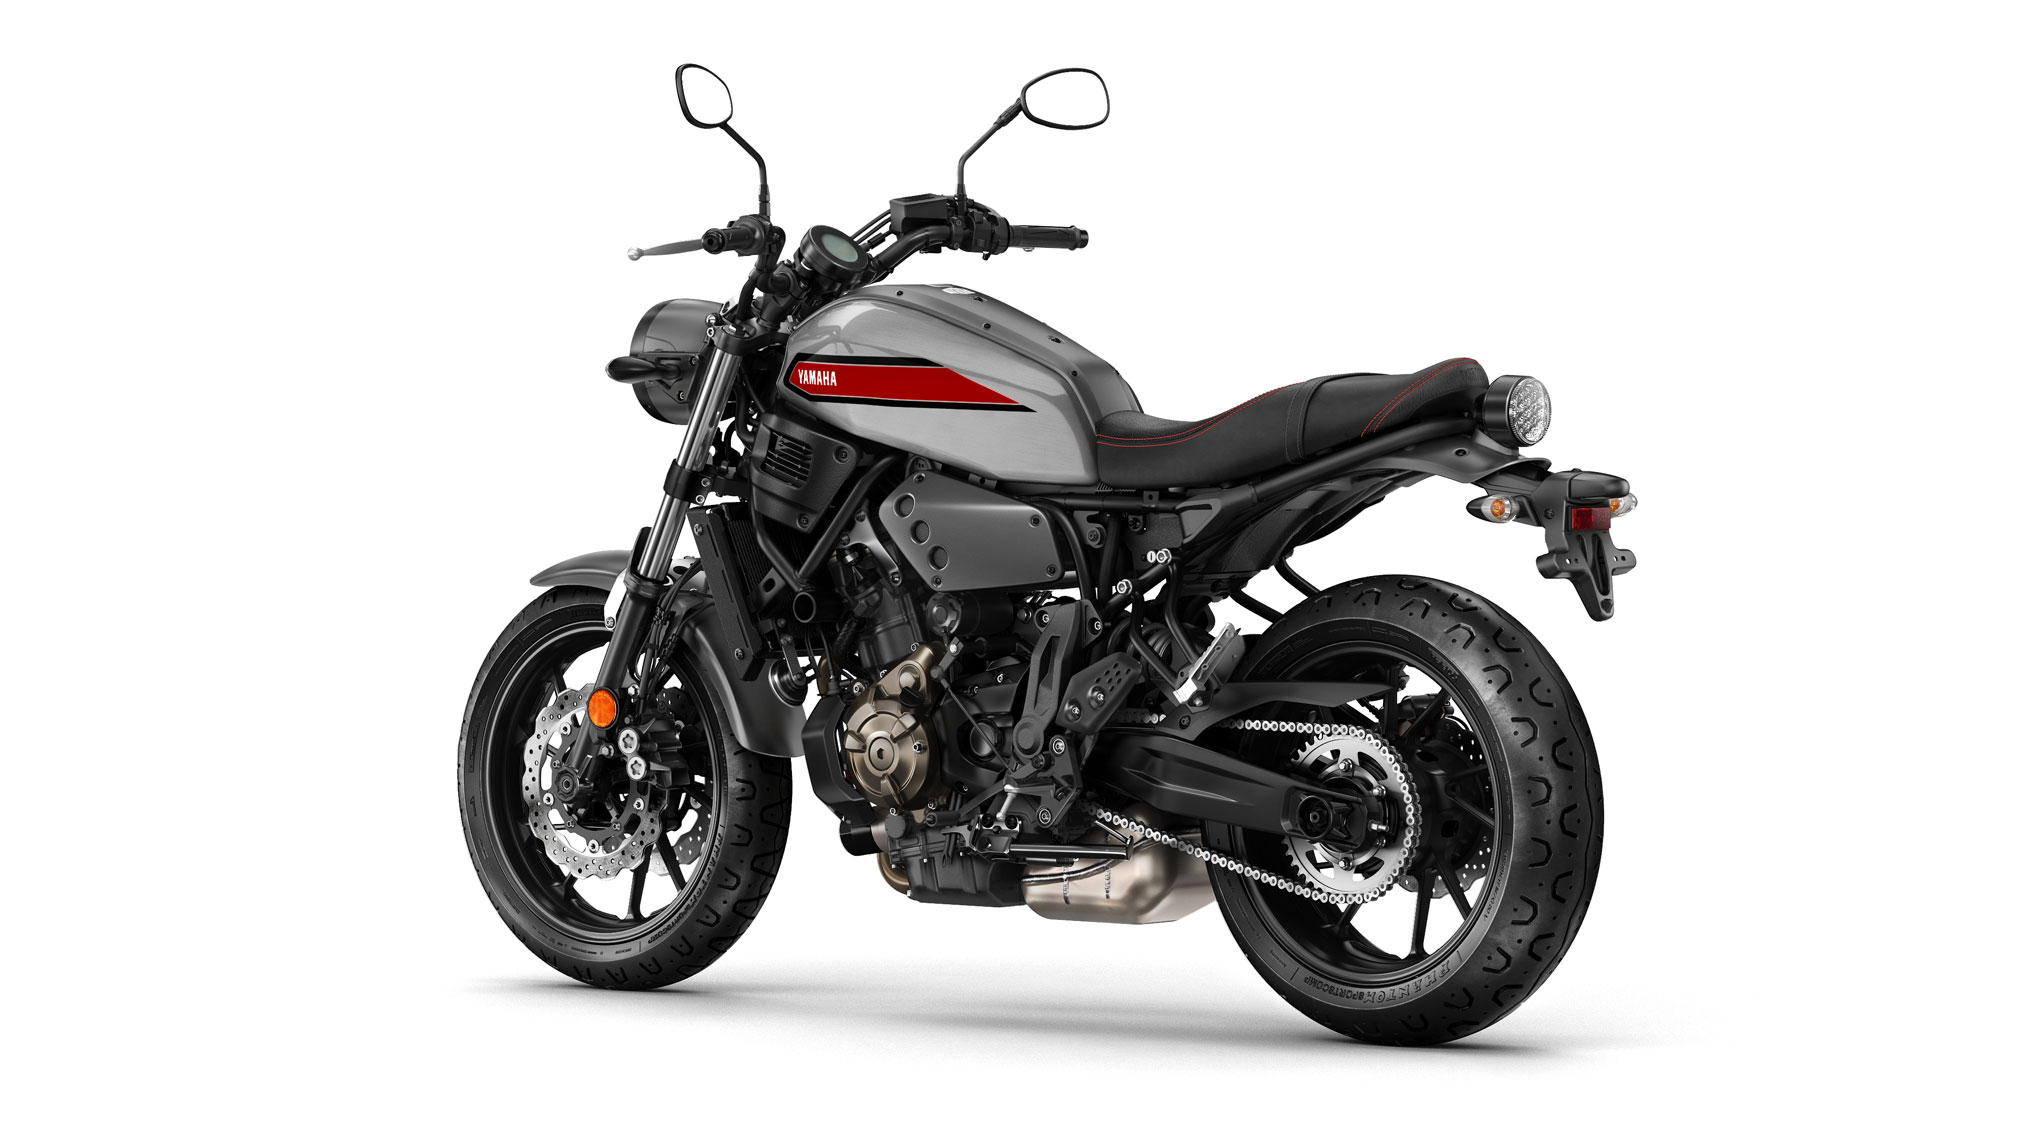 2019 Yamaha XSR700 Guide • Total Motorcycle